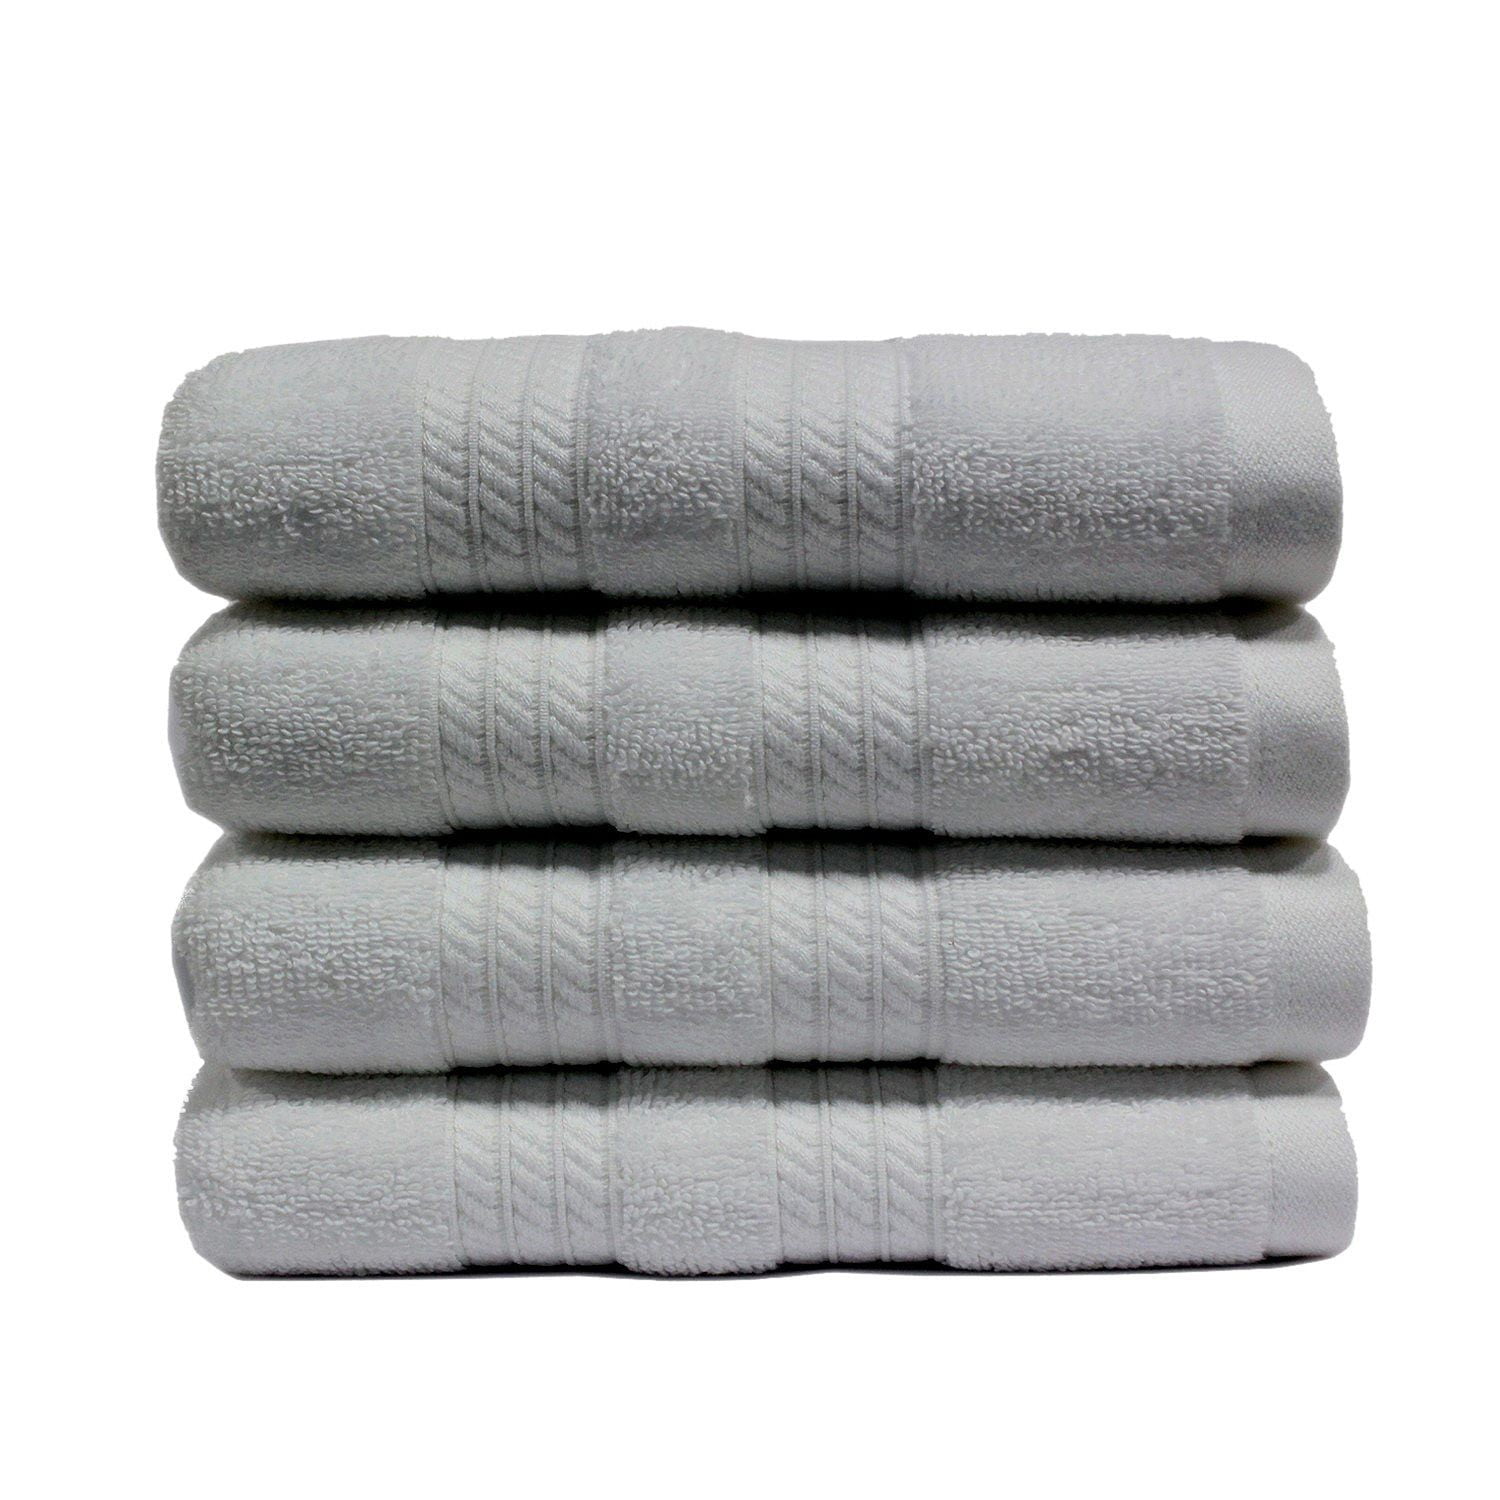 Hotel Premier Collection 100% Cotton Luxury Hand Towel by Member's Mark